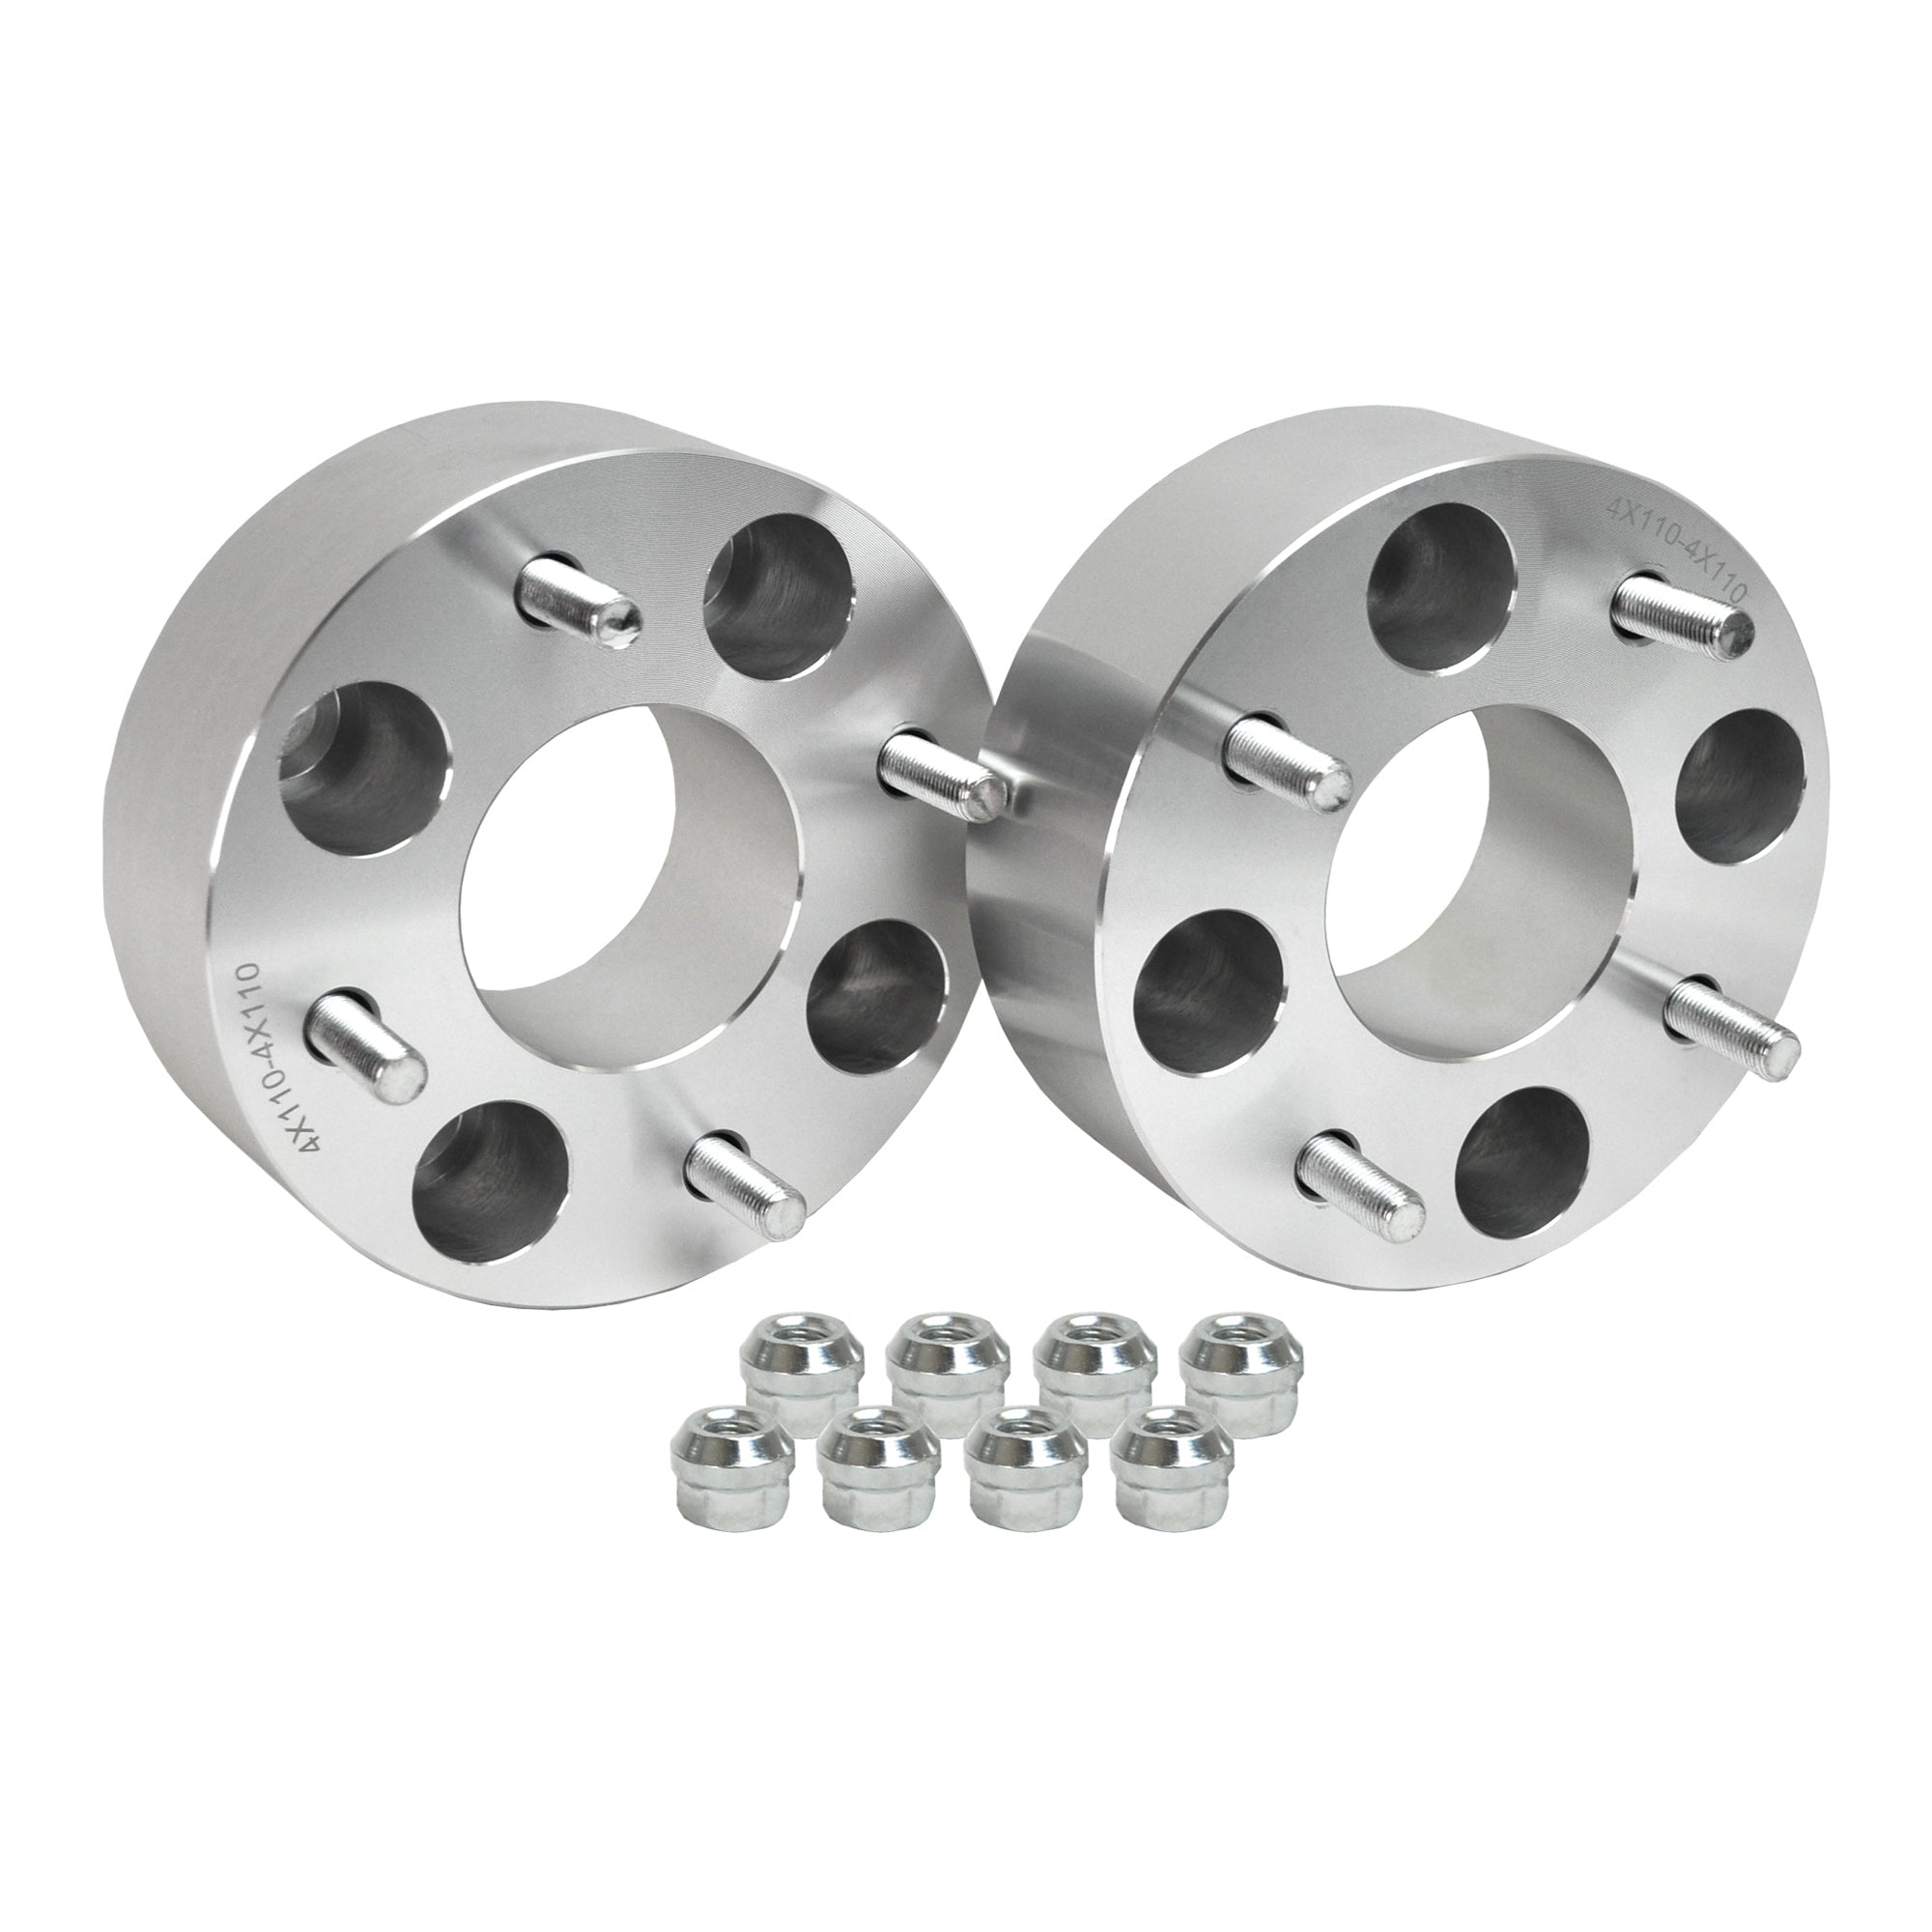 Wheel Spacer for Bombardier Outlander 650 Max 